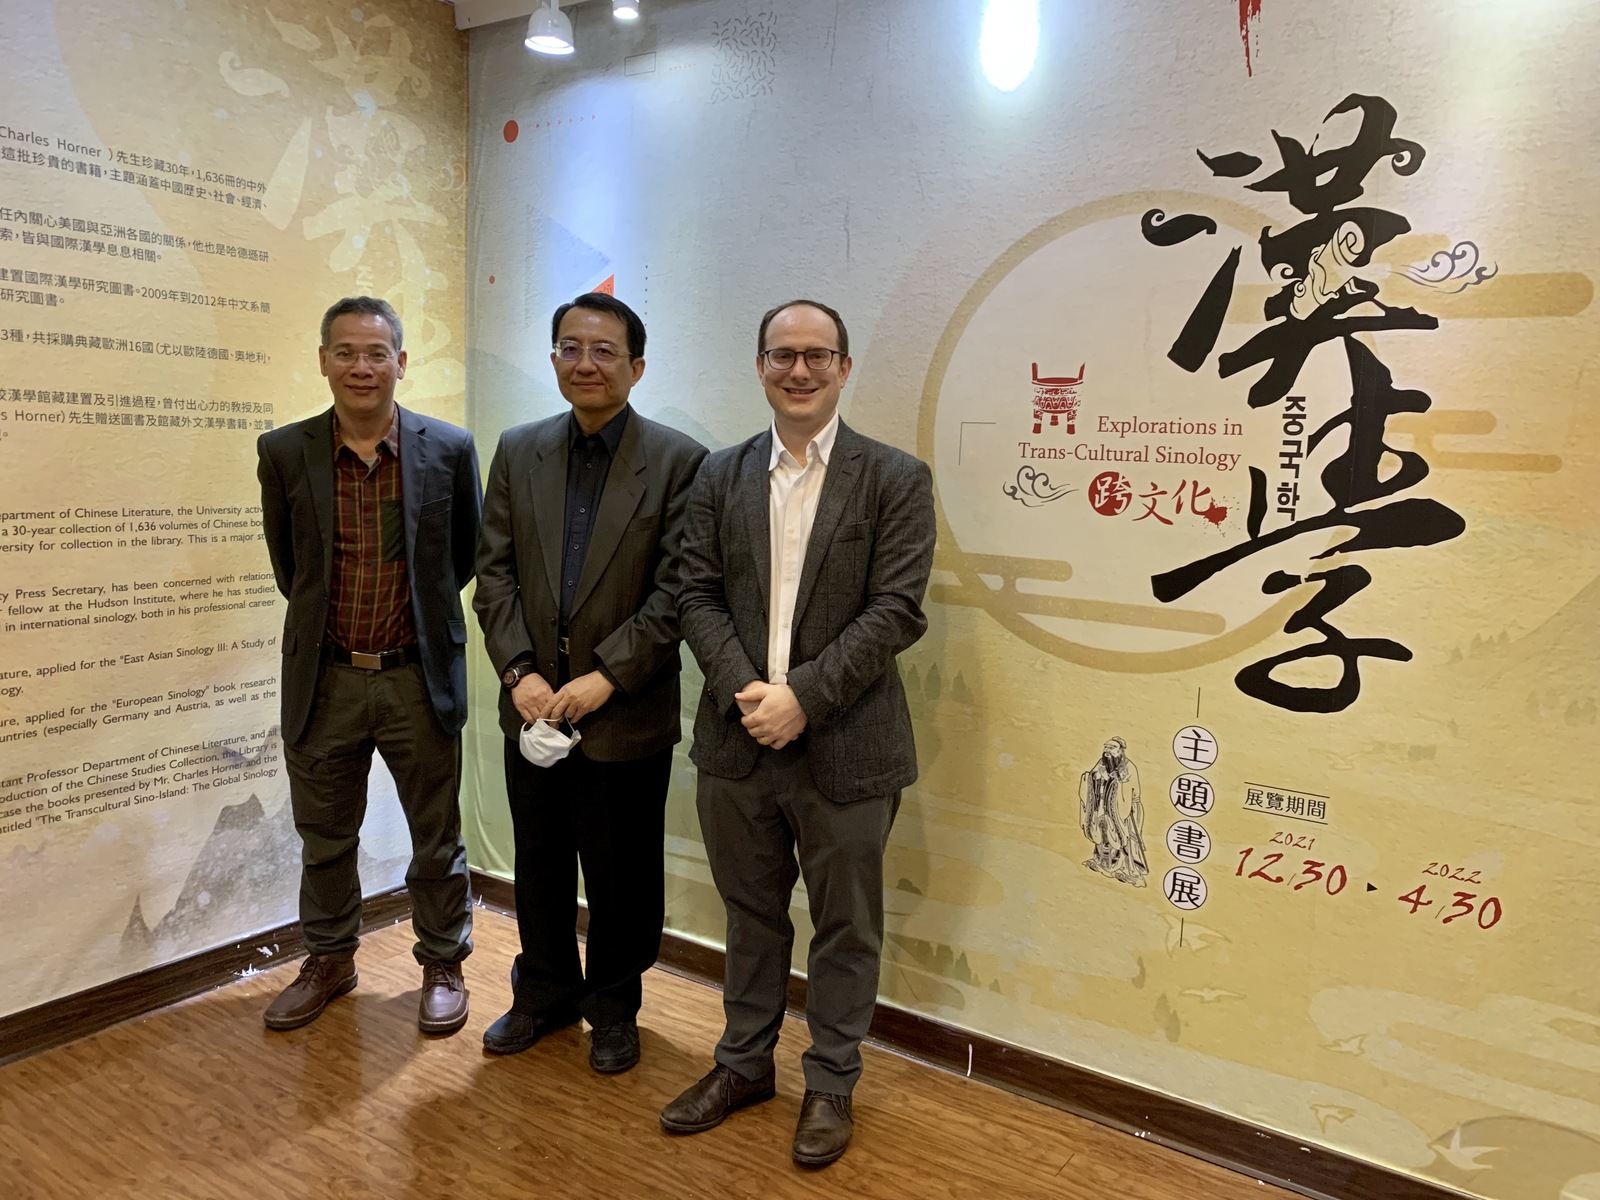 NSYSU’s Office of Library and Information Services and the College of Liberal Arts jointly planned the Explorations in Trans-Cultural Sinology exhibition and the shooting of an animation “The Transcultural Sino-Island: The Global Sinologist Forum at National Sun Yat-sen University” to promote the Global Sinology platform and the library resources on campus. From the left are: Dean of NSYSU College of Liberal Arts Professor Hsi-San Lai, Vice President for Library and Information Services Wei-Kuang Lai, Assistant Professor Mark Frederick McConaghy of the Department of Chinese Literature.